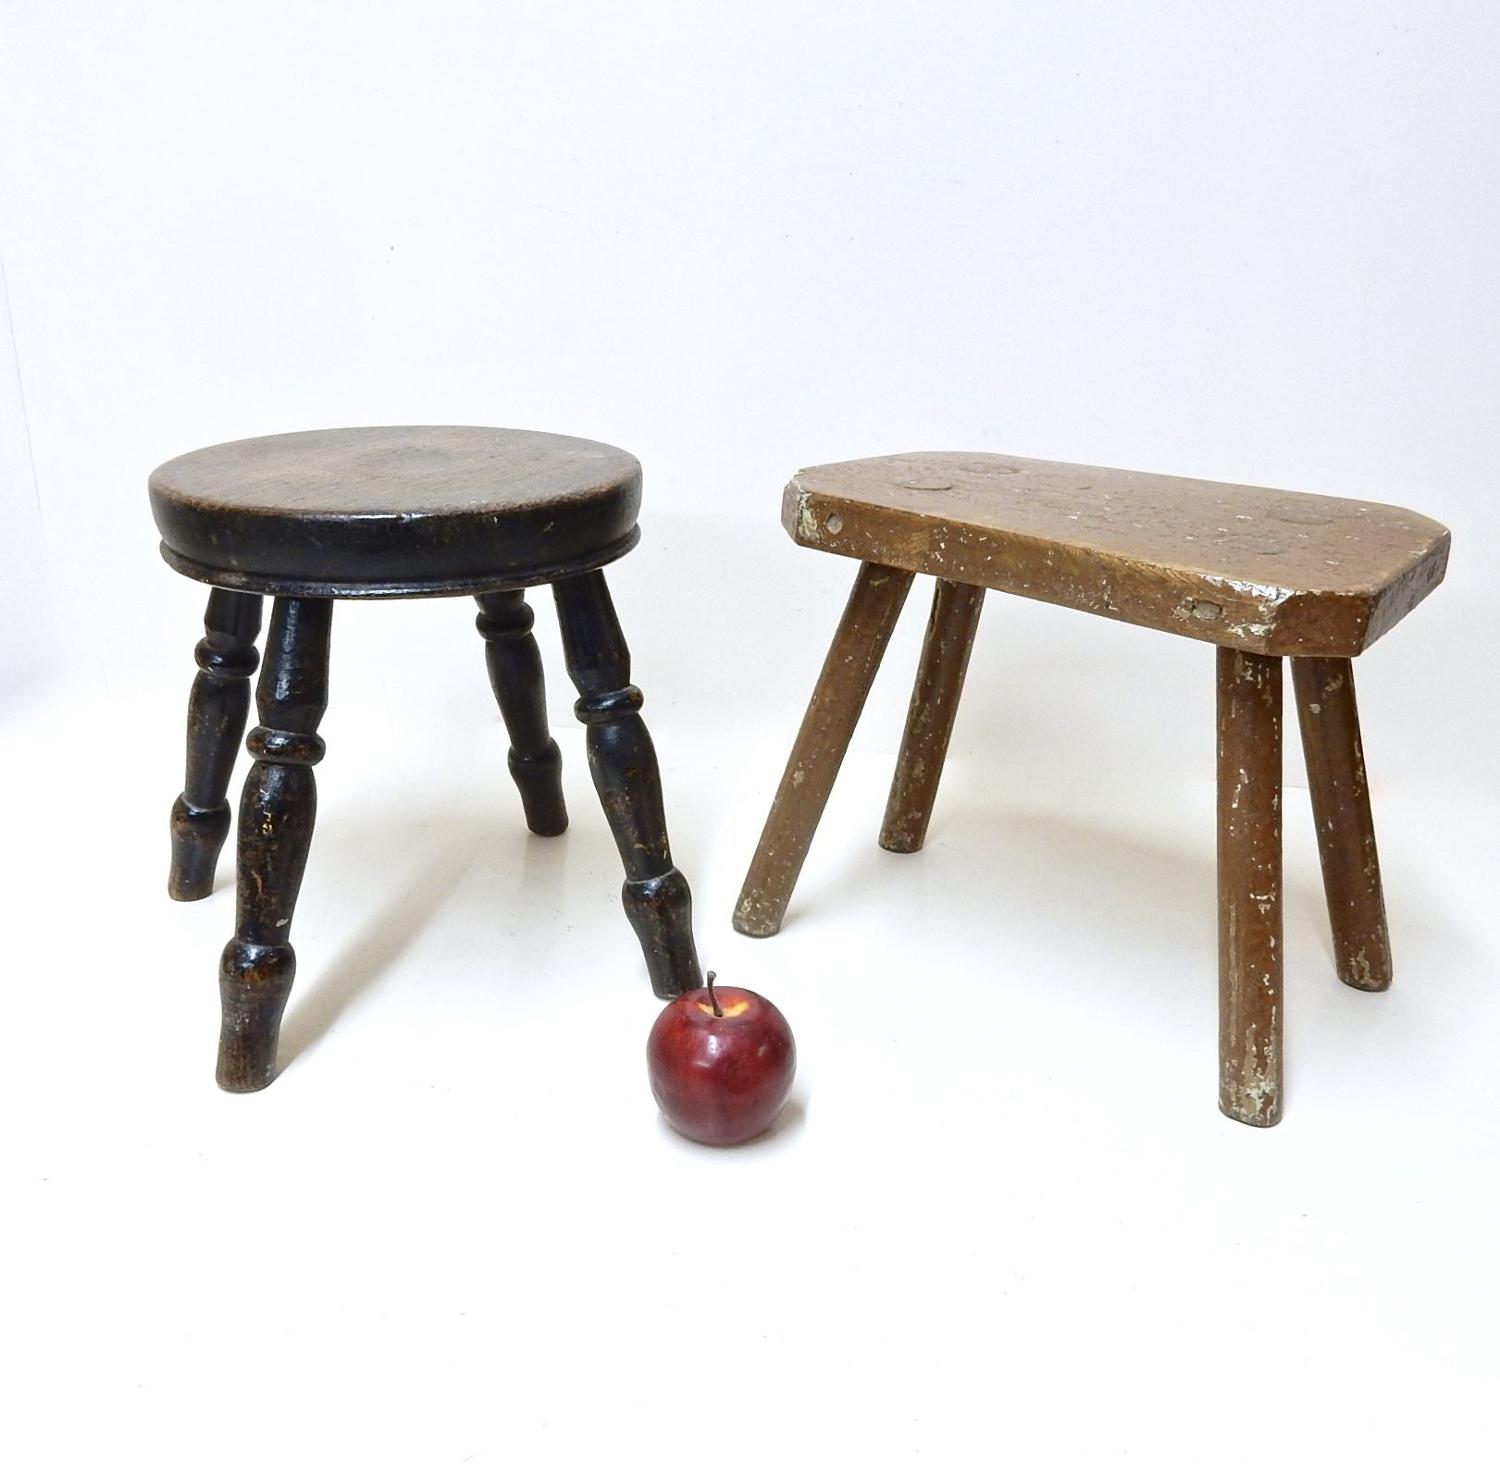 2x Small Country Stools